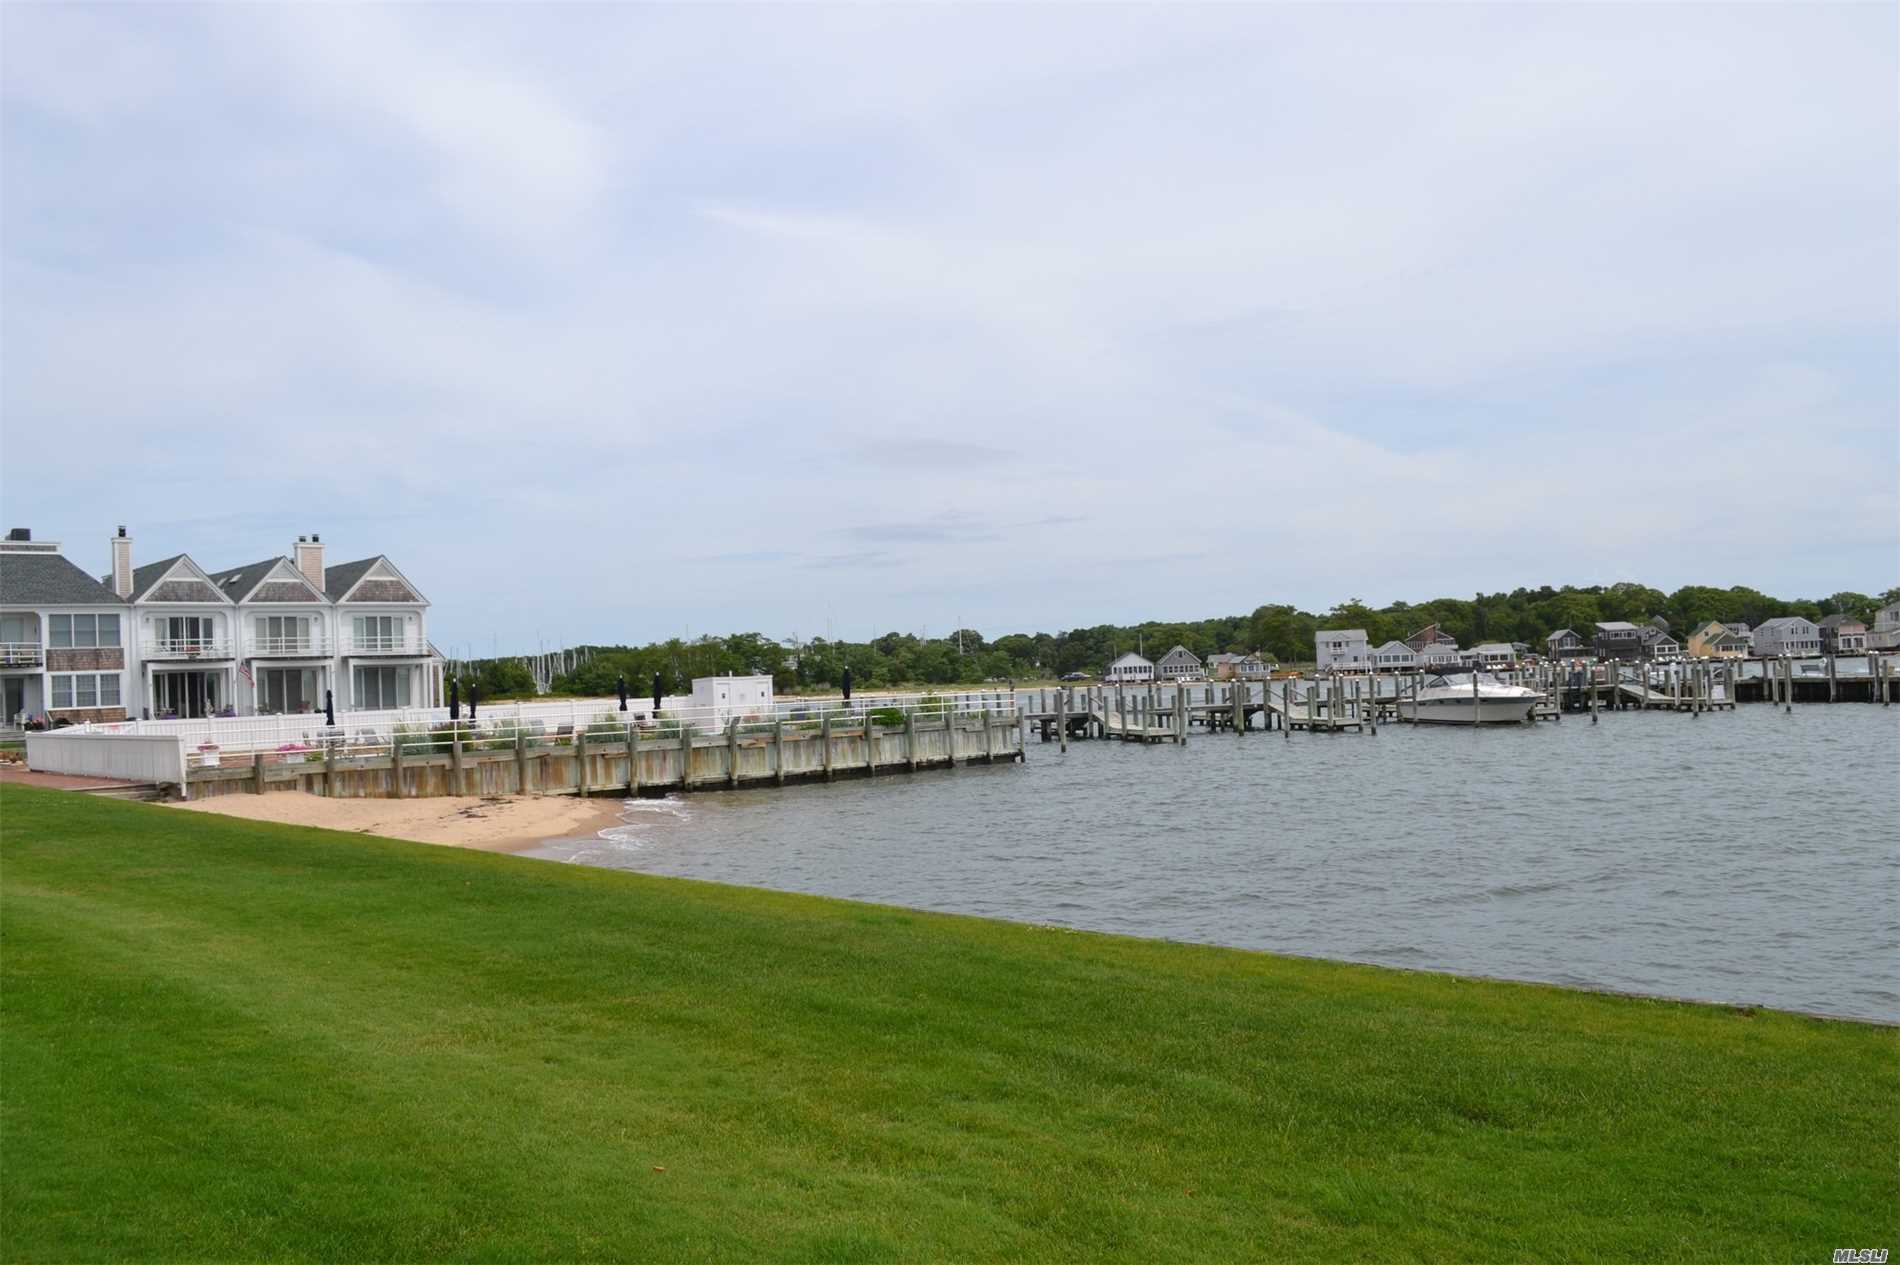 Charming First Floor Unit. Beautiful Harbor And Bay Views , Deed Dock With Protected Marina. Heated In -Ground Pool Community Beach, Tennis And Islands End Golf Course Minutes Away. Perfectly Located In The Heart Of Greenport Village.